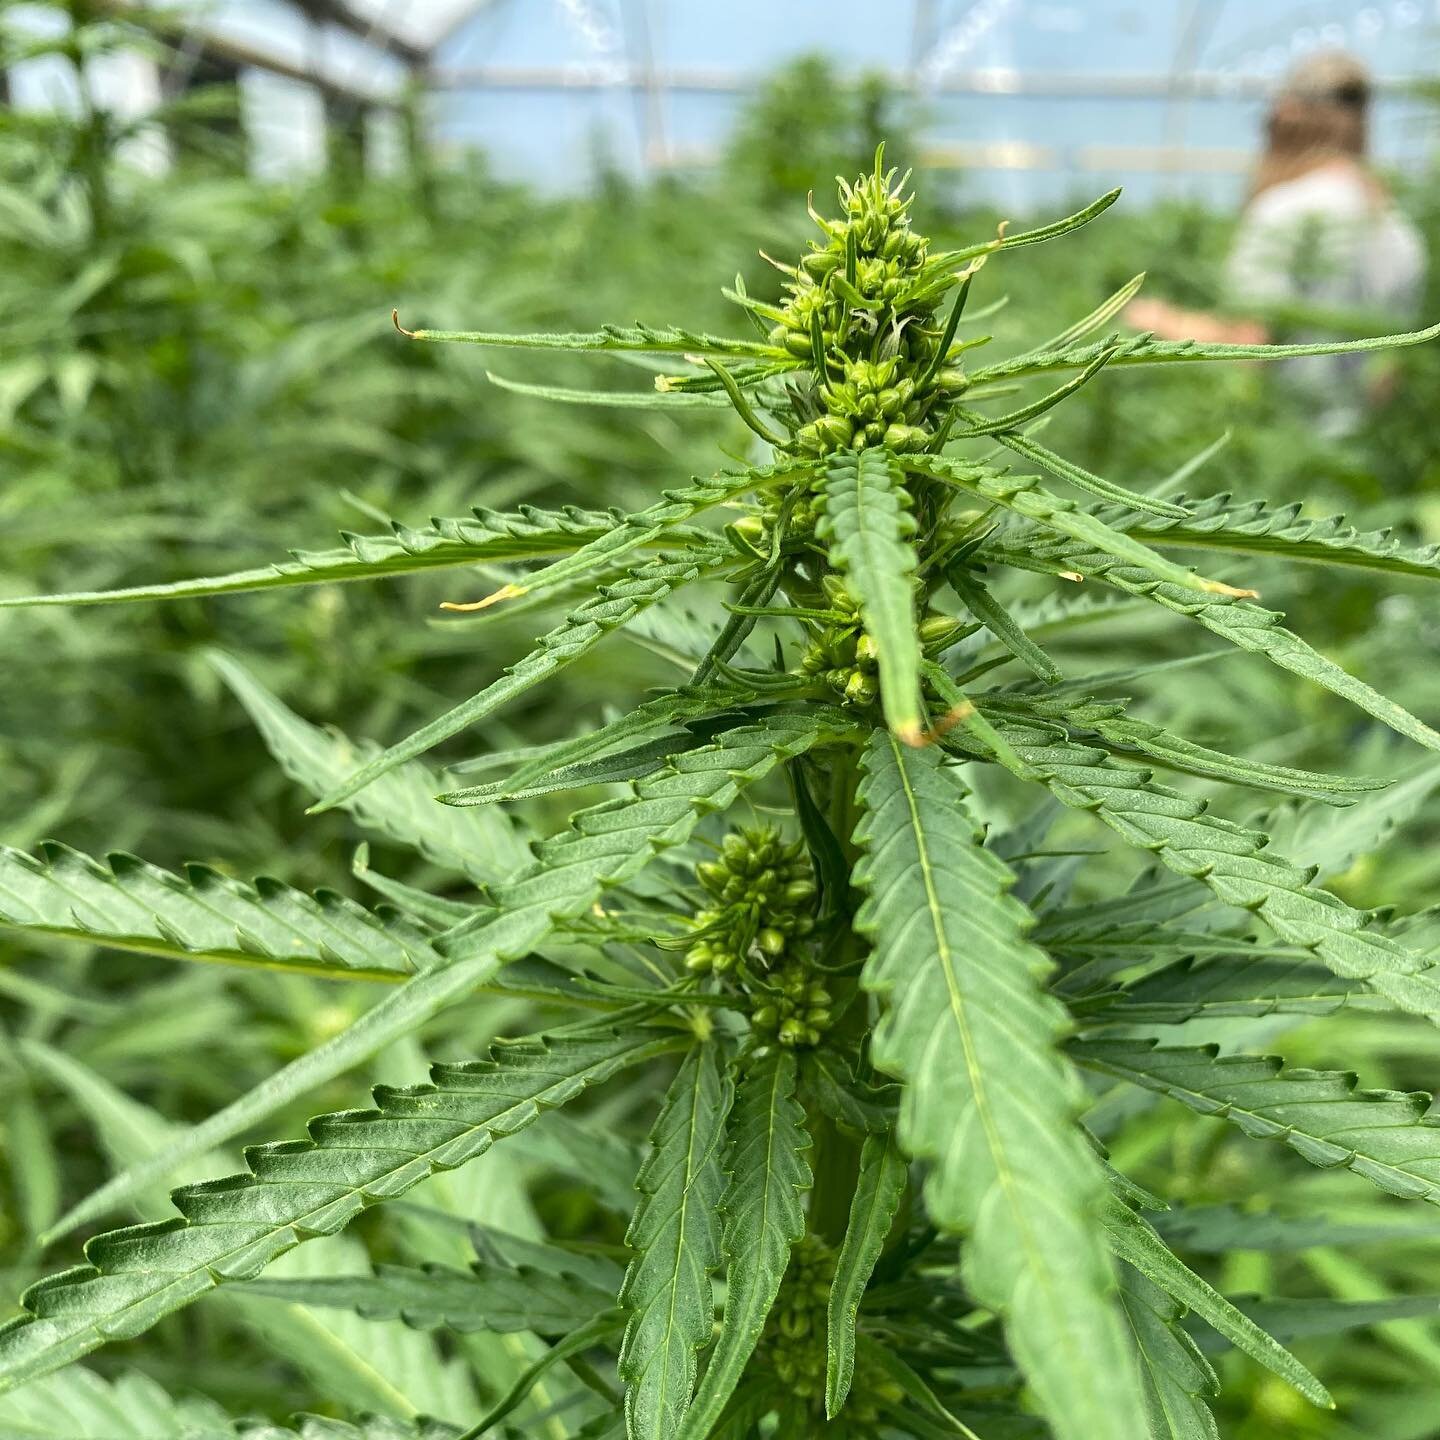 Once these flowers fully mature it&rsquo;s pollen collection time. Excited to be making significant progress in shifting minor cannabinoids to major cannabinoids while improving agronomic traits and flower quality. Stay tuned!
*
*
*
#beaconhemp #indu